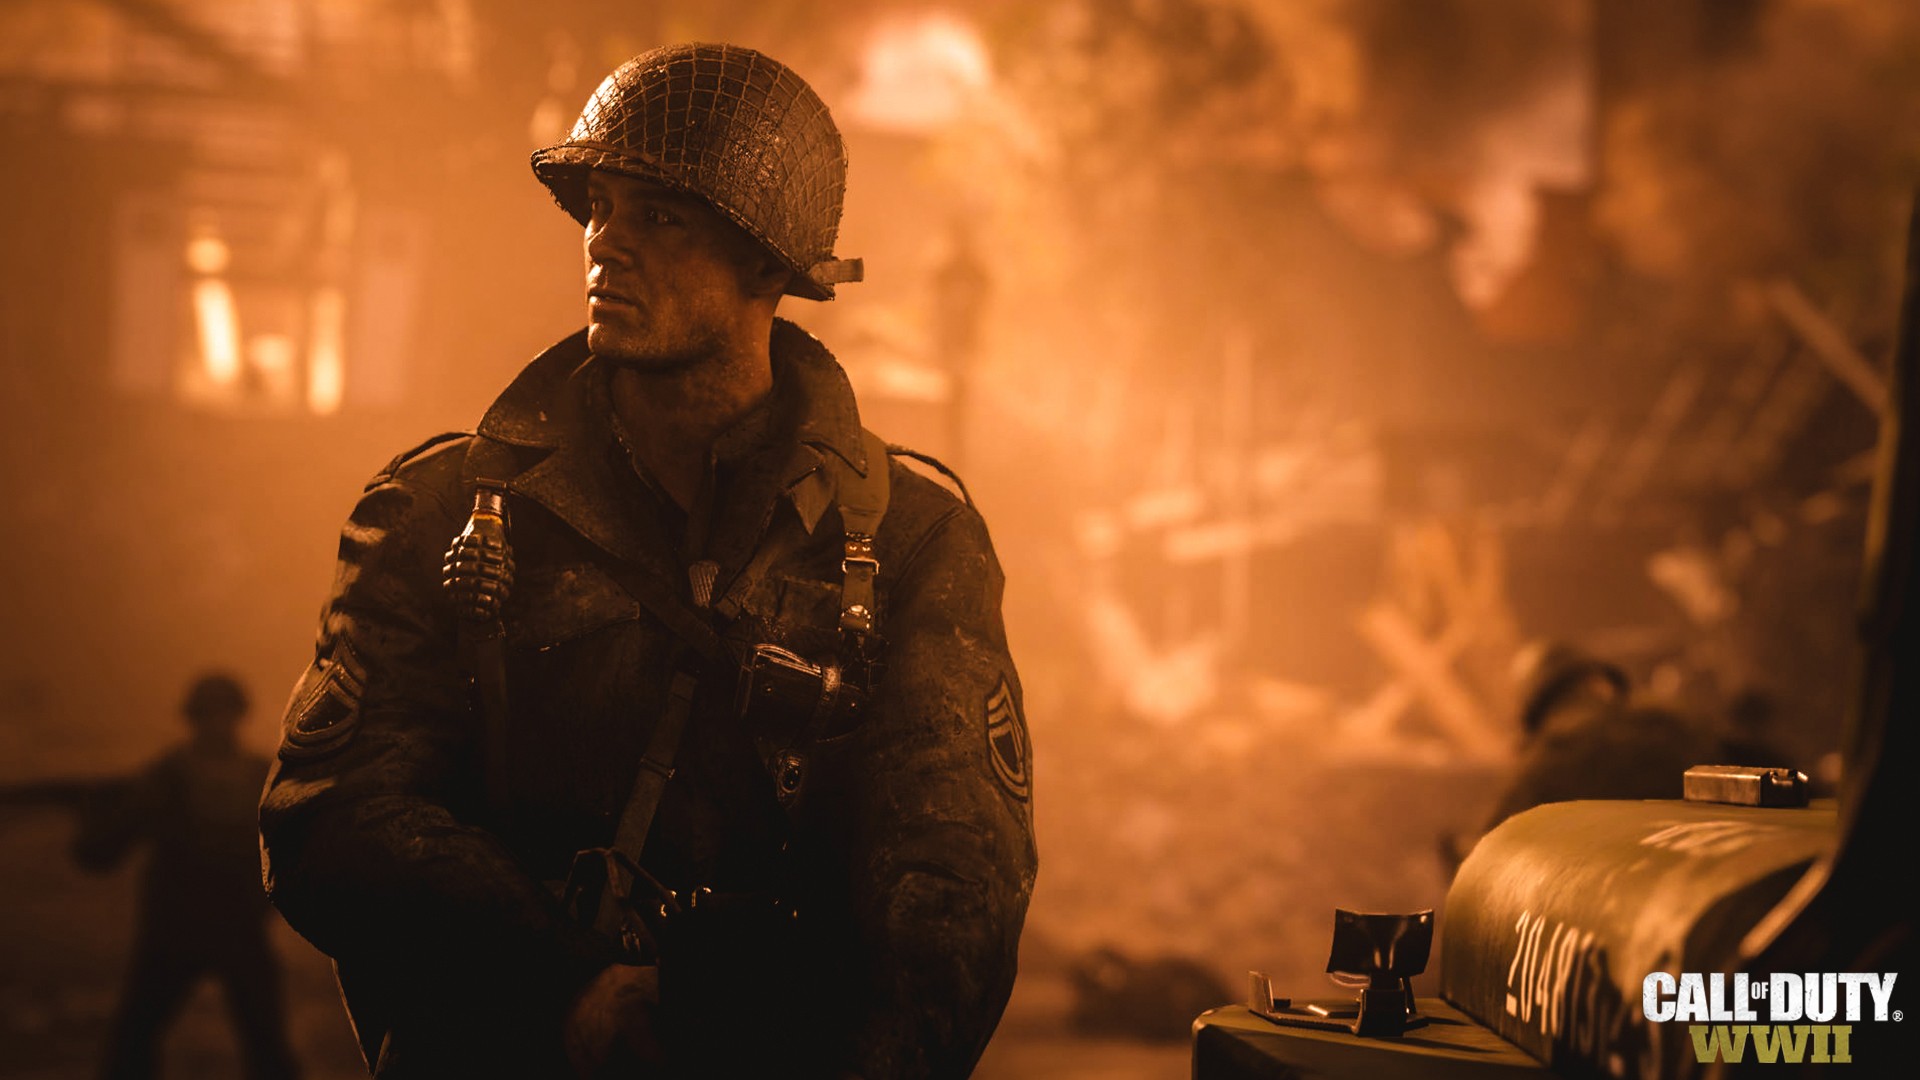 call of duty world war 2 outages on pc